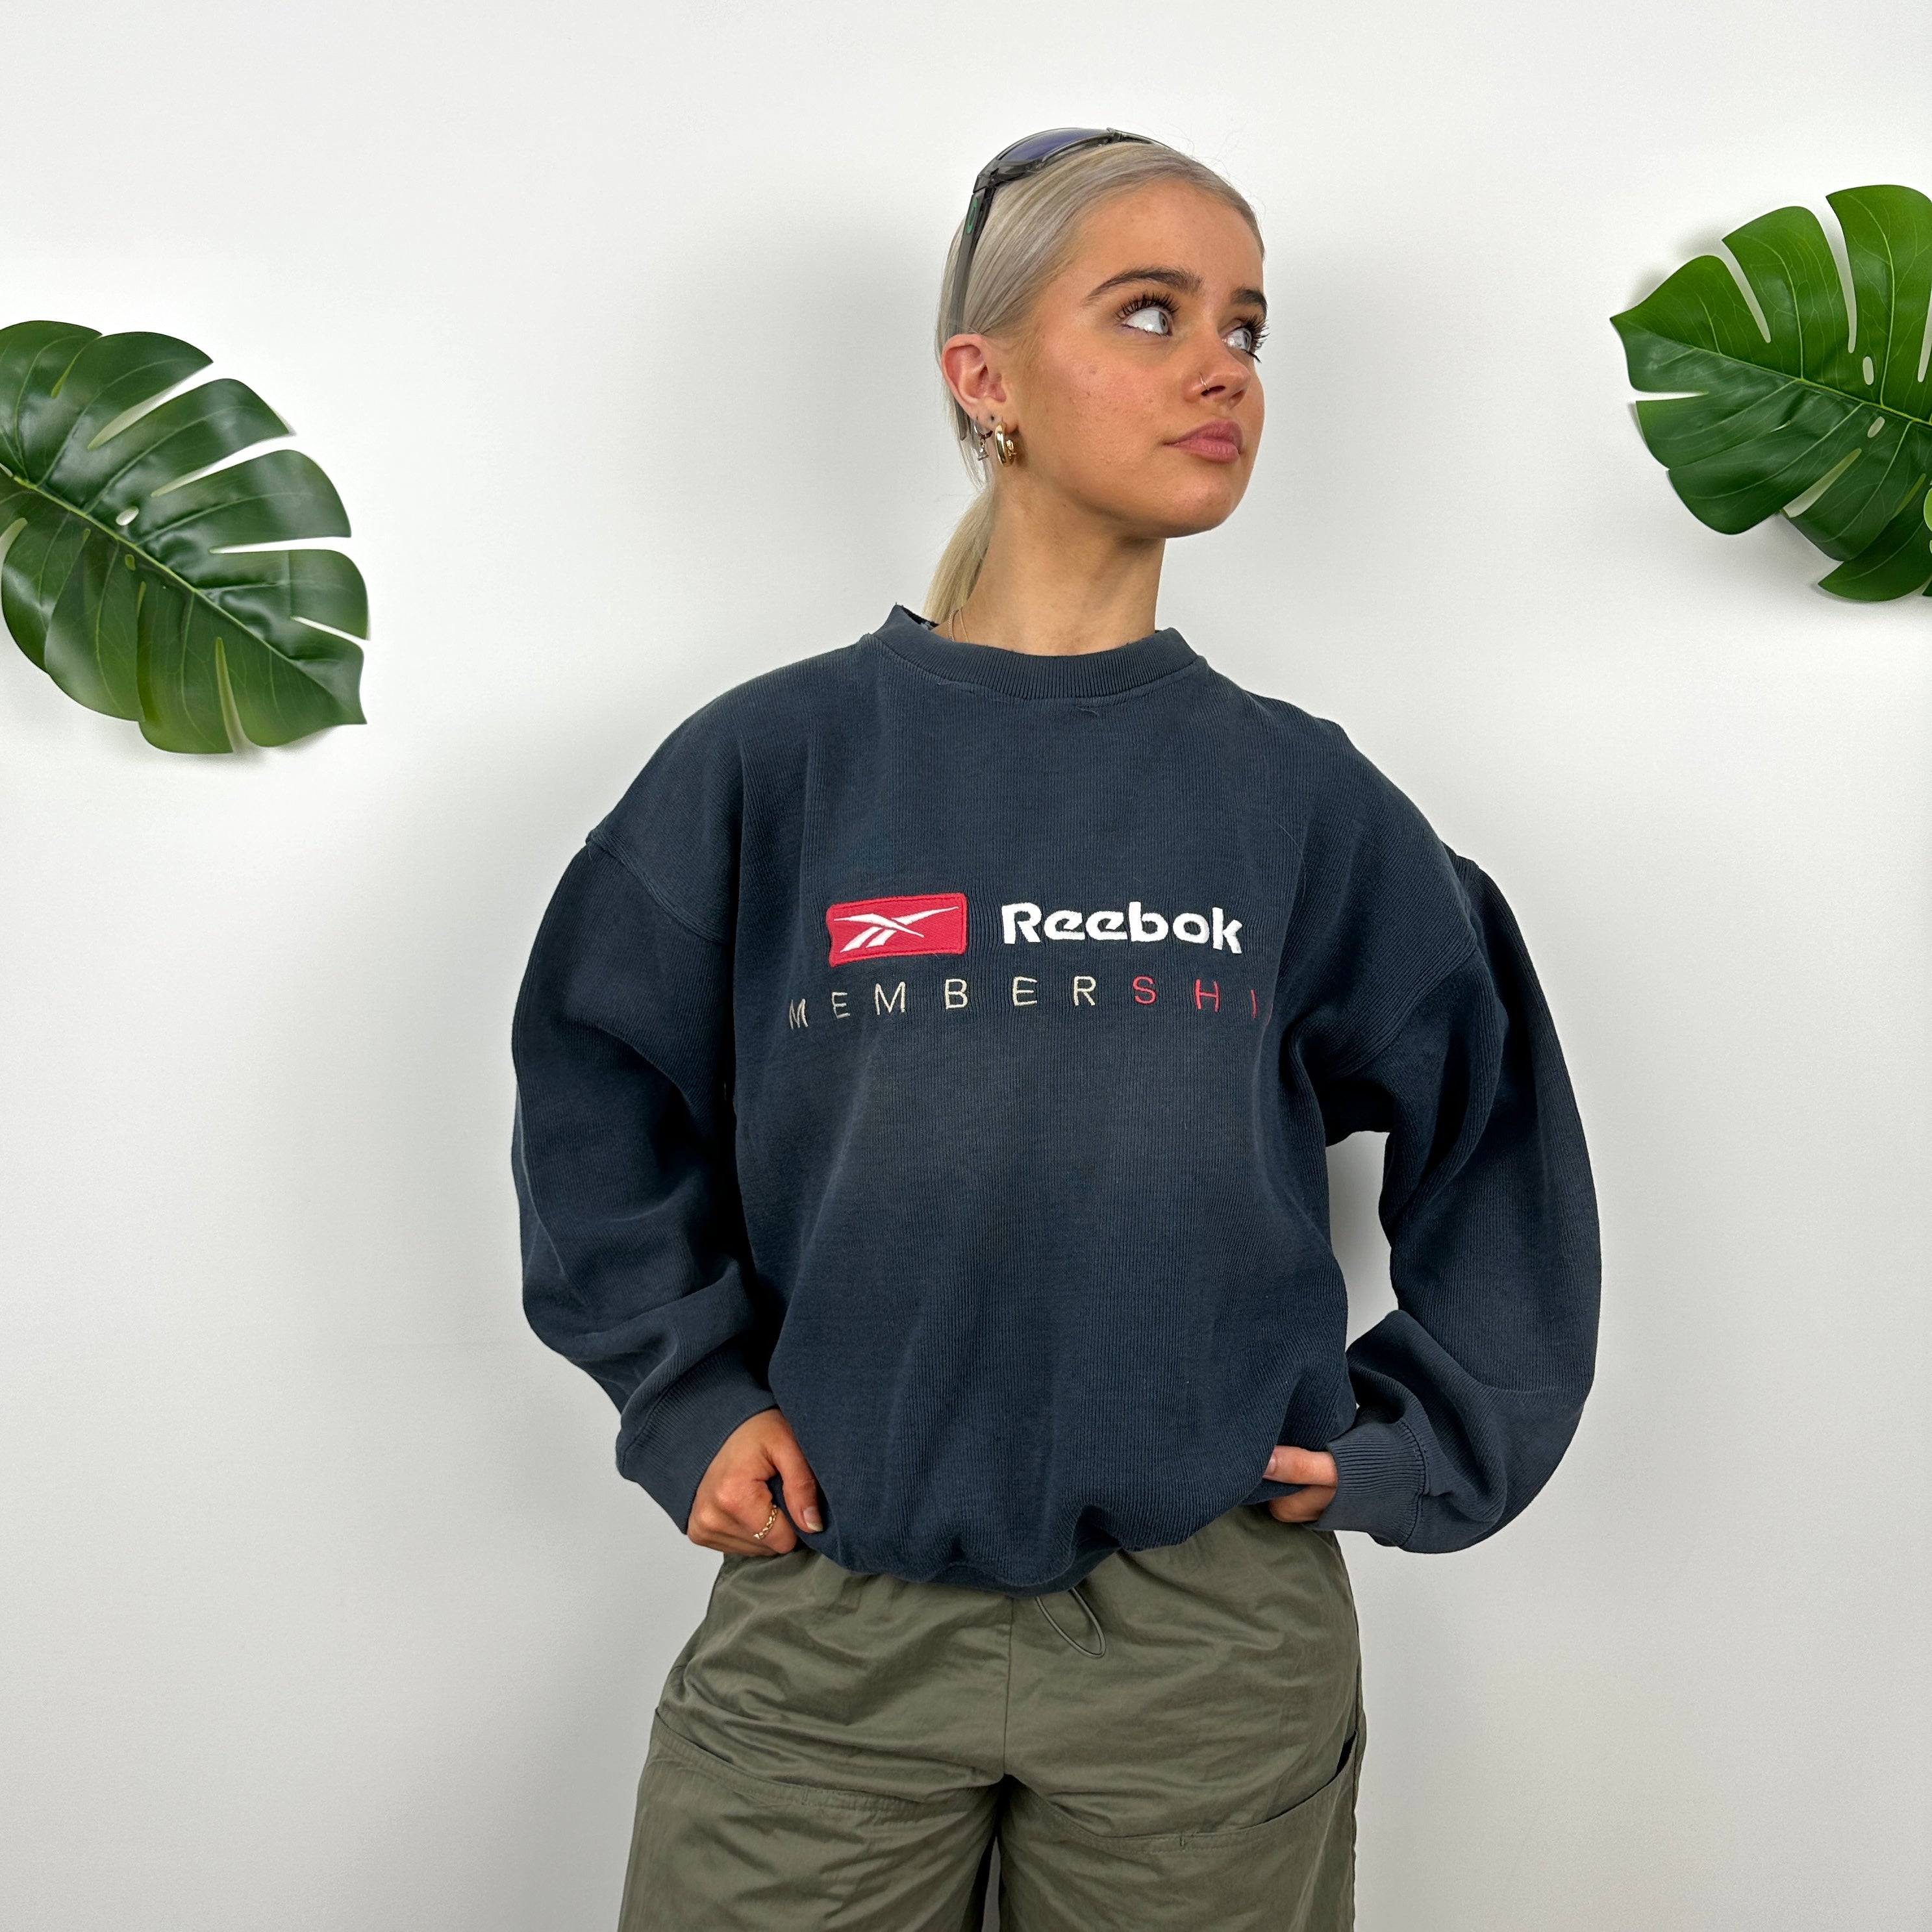 Reebok Membership RARE Navy Embroidered Spell Out Sweatshirt (S)